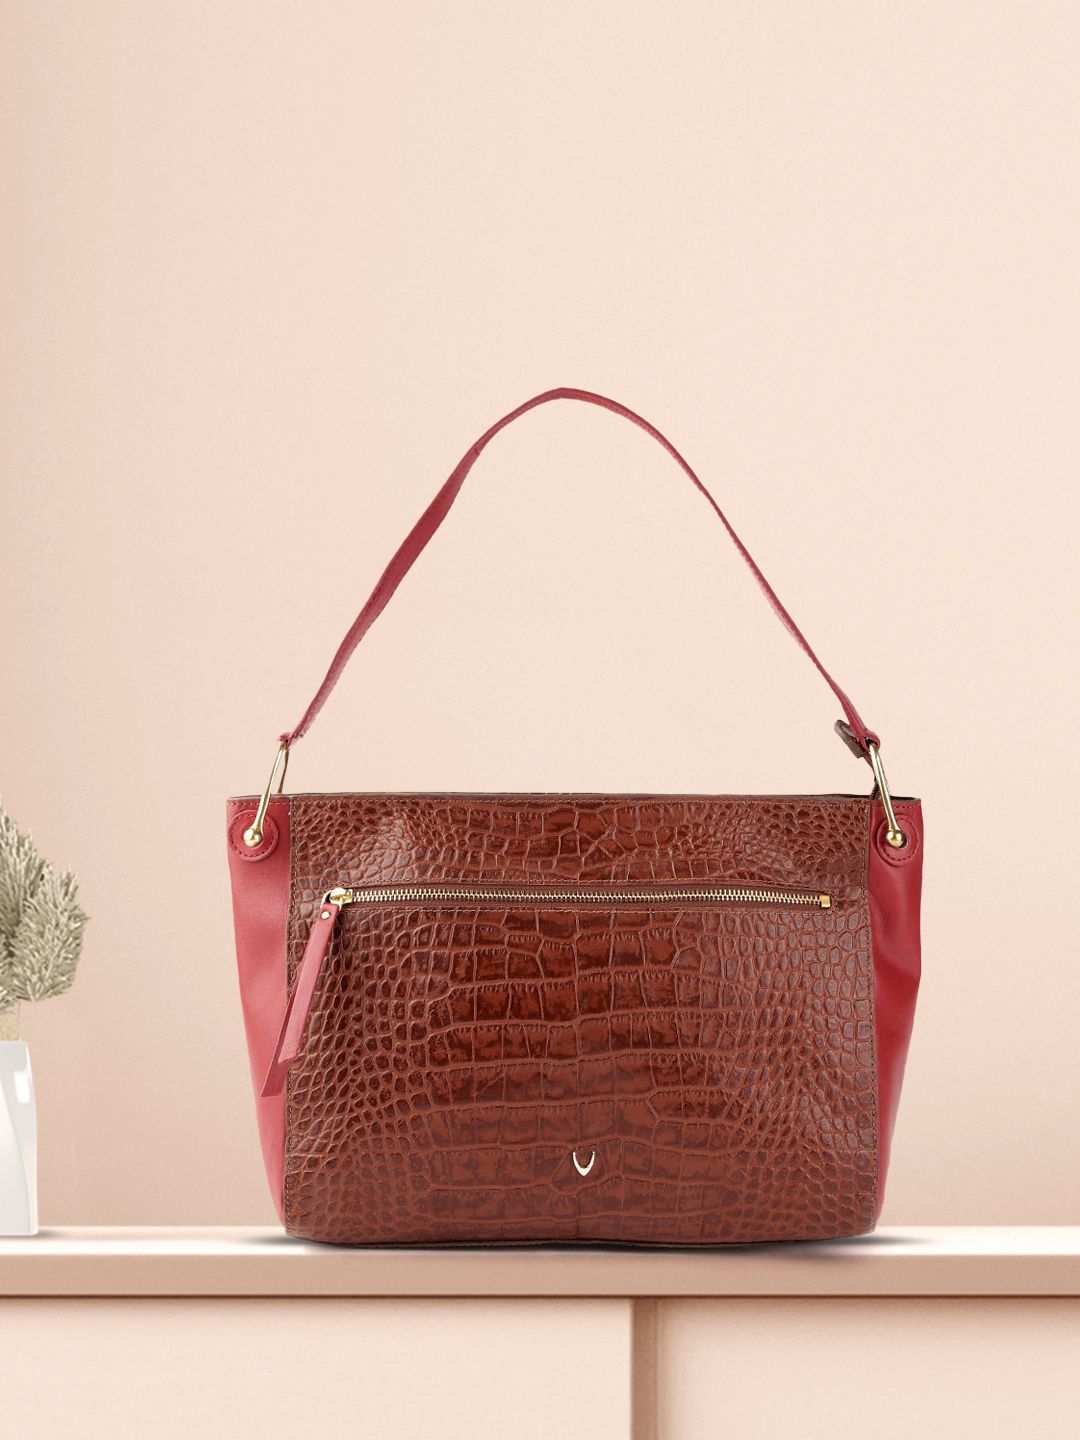 Hidesign Women Brown & Red Croc-Textured Leather Shoulder Bag Price in India